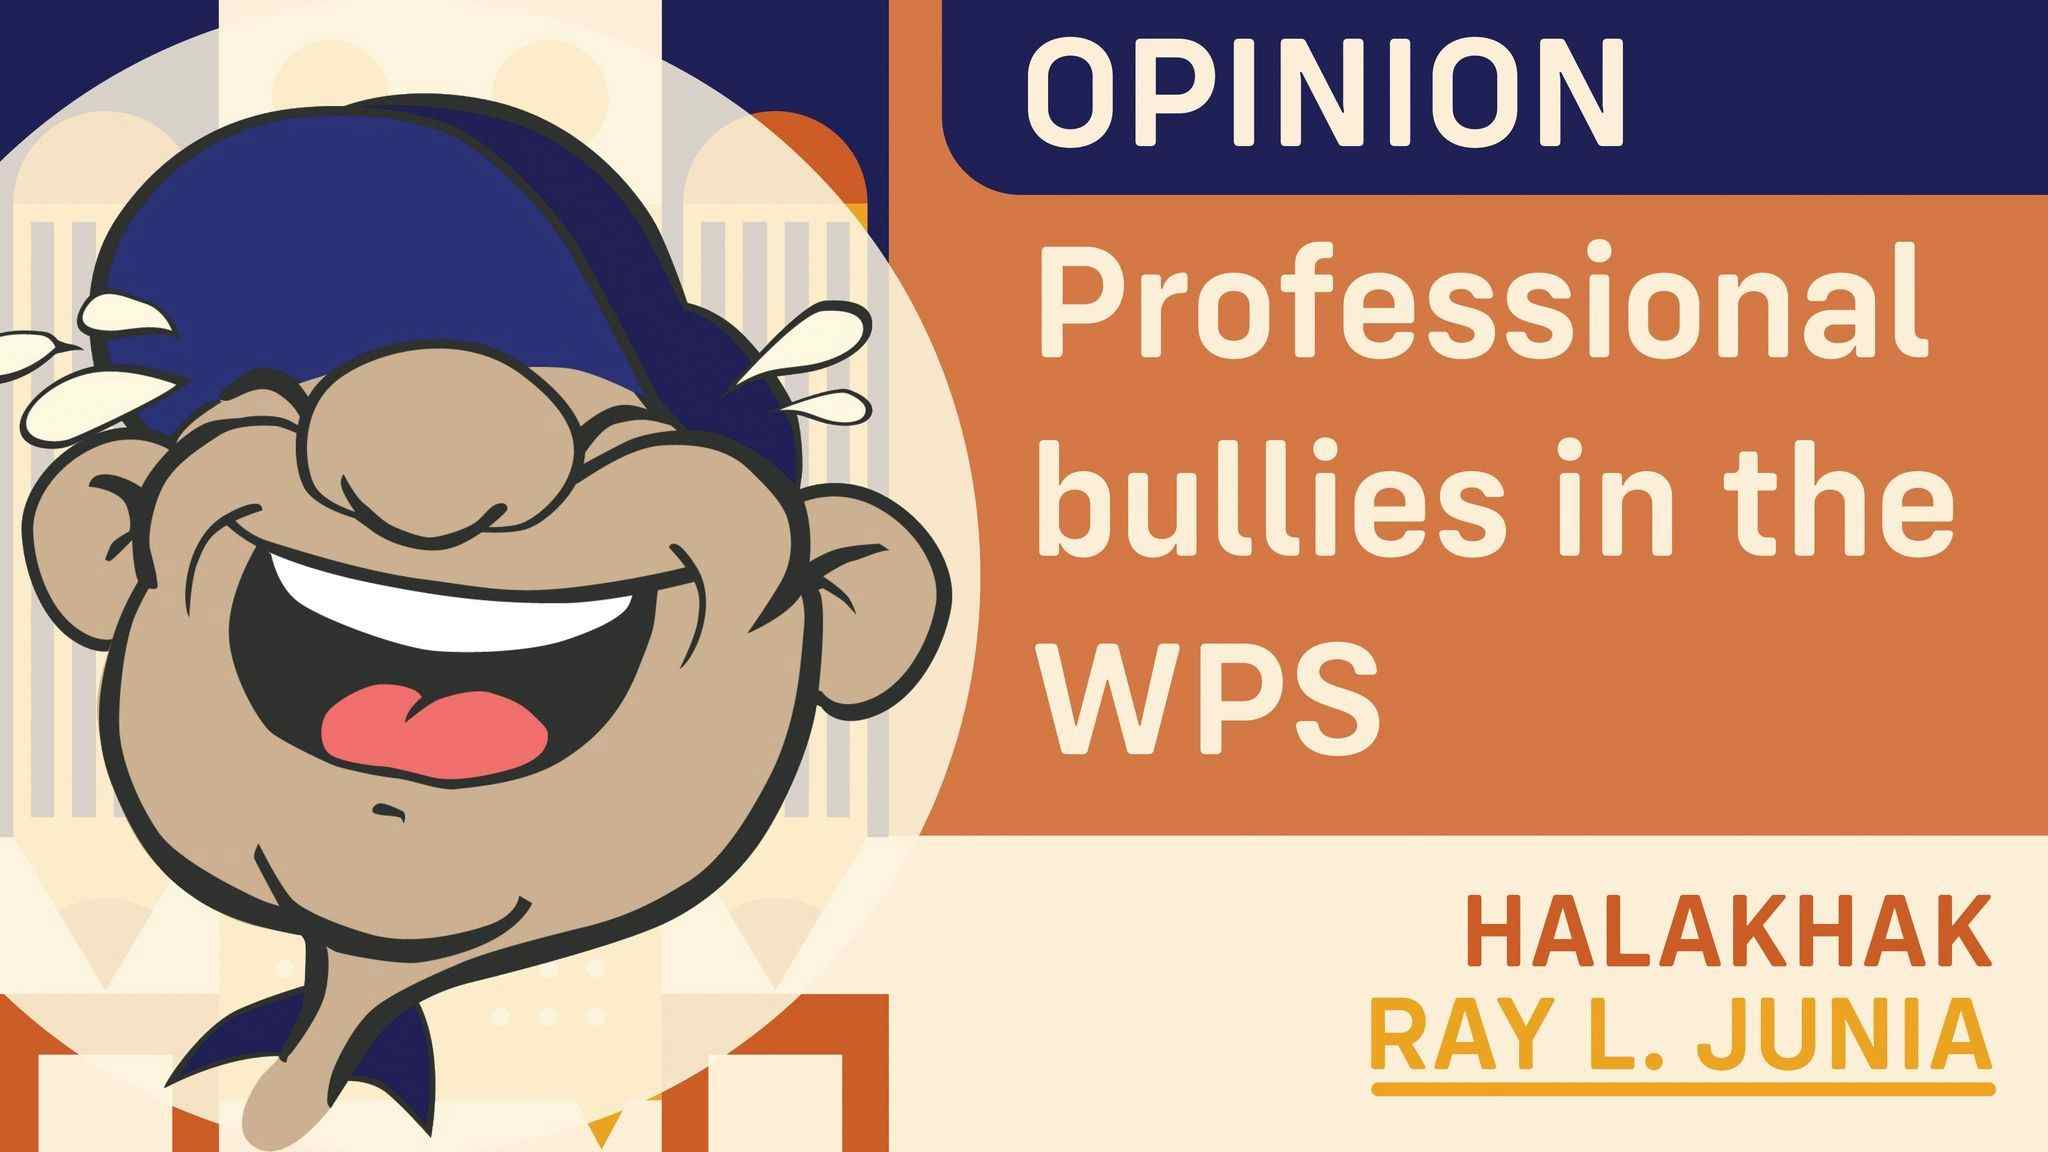 Professional bullies in the WPS